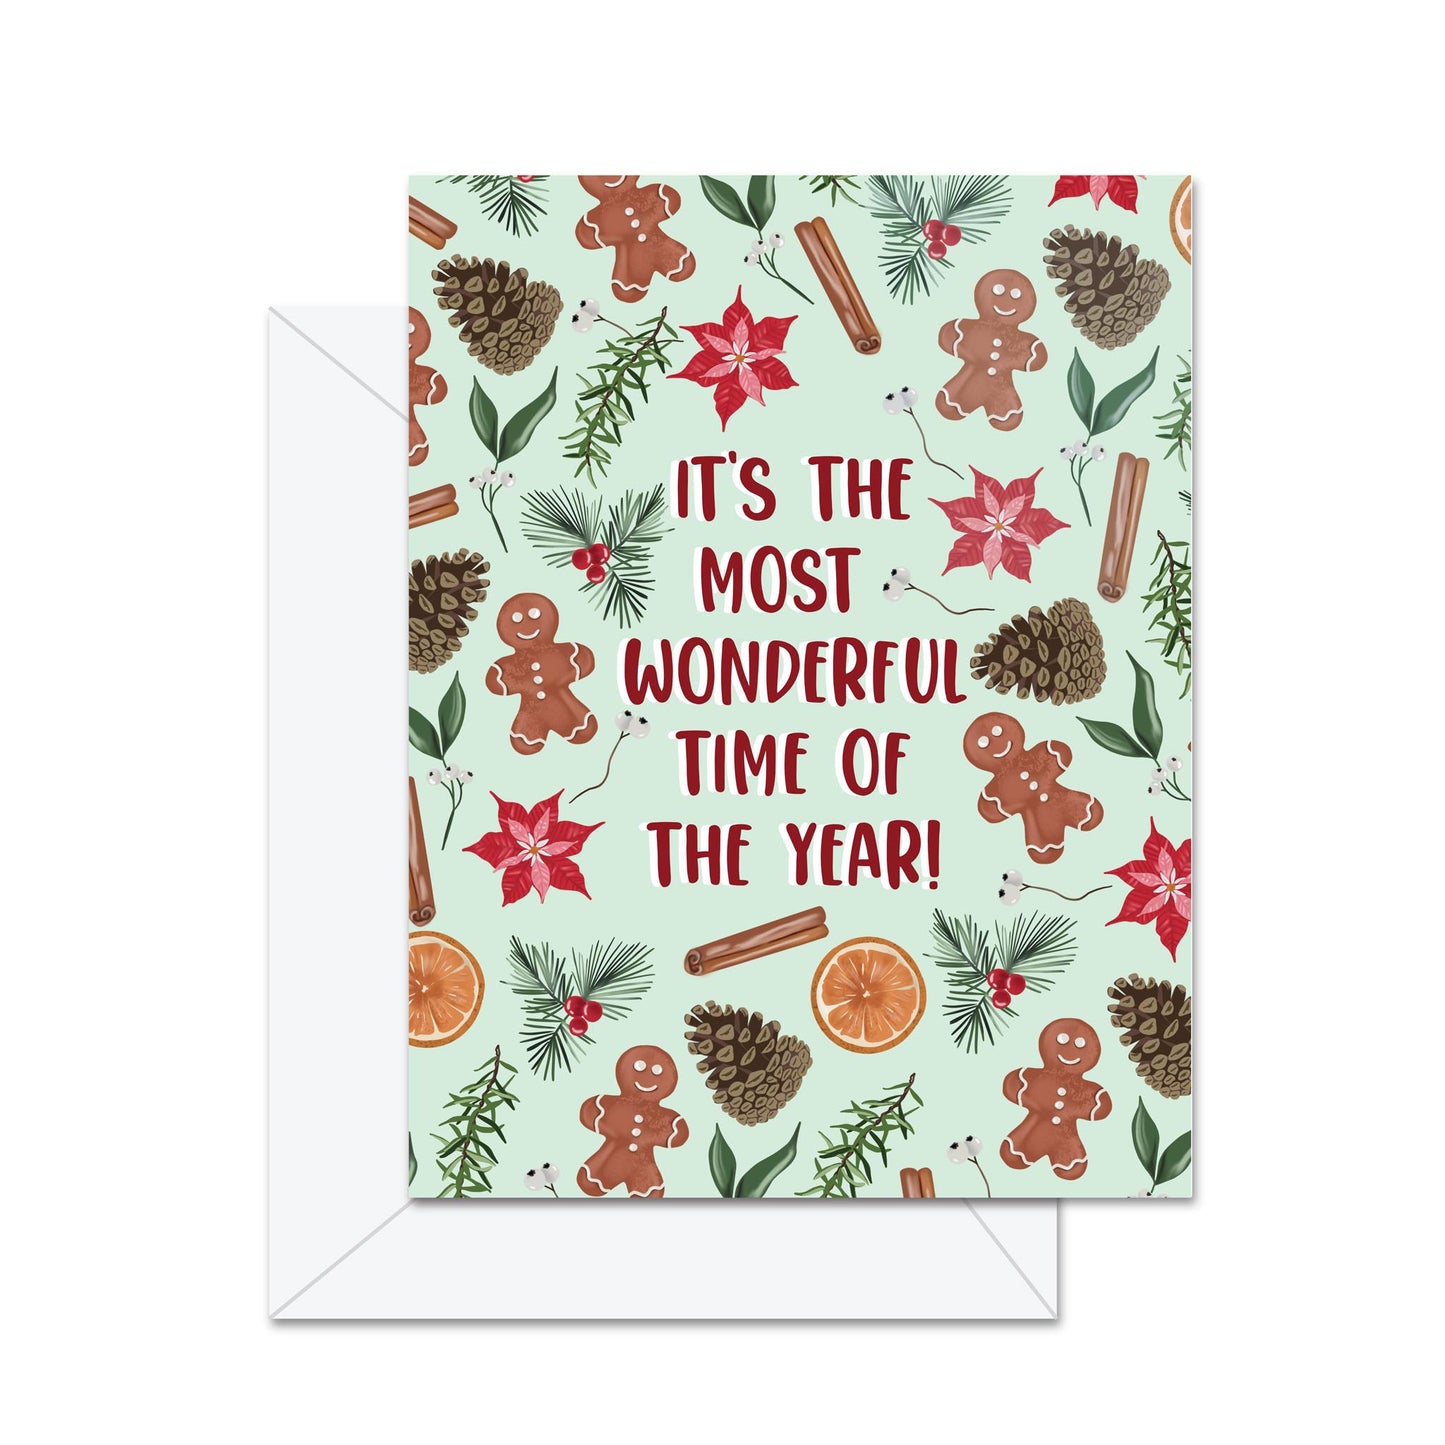 It's The Most Wonderful Time of The Year! - Greeting Card